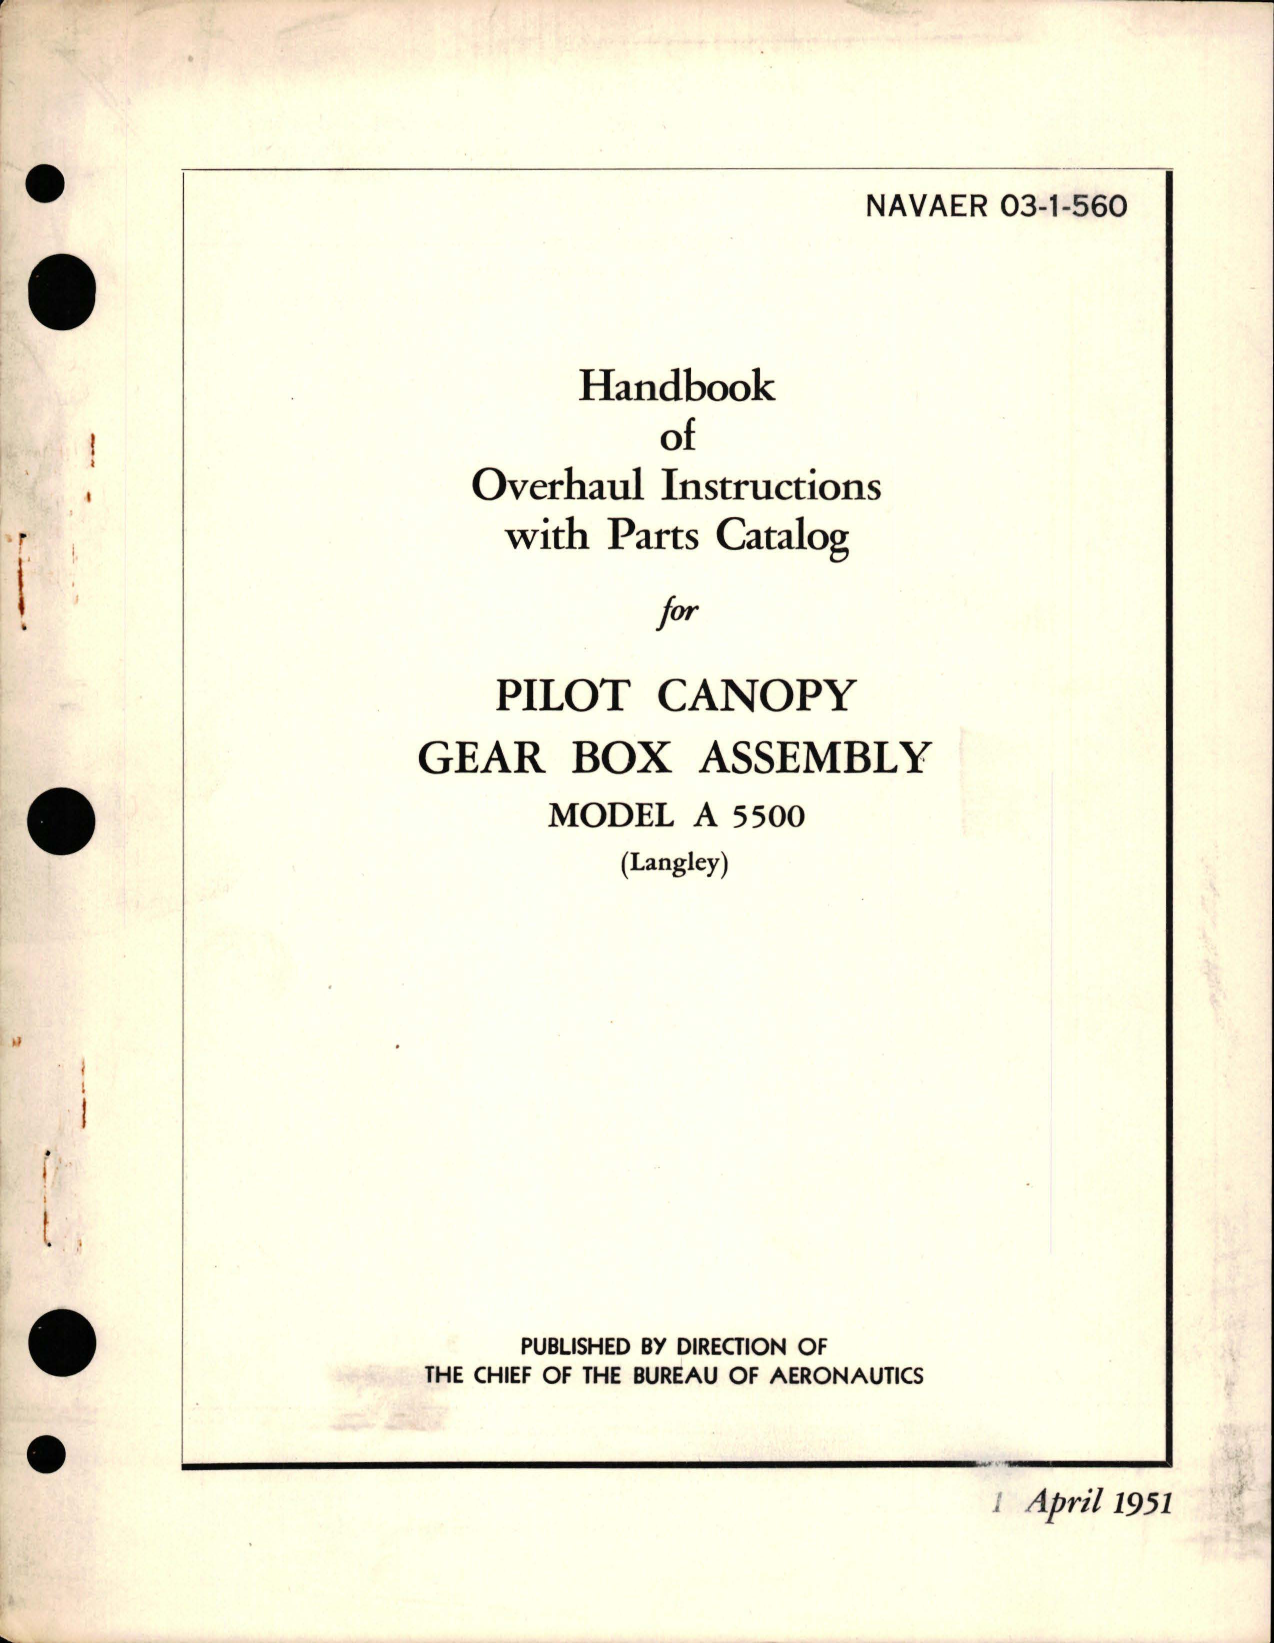 Sample page 1 from AirCorps Library document: Overhaul Instructions with Parts Catalog for Pilot Canopy Gear Box Assembly - Model A 5500 